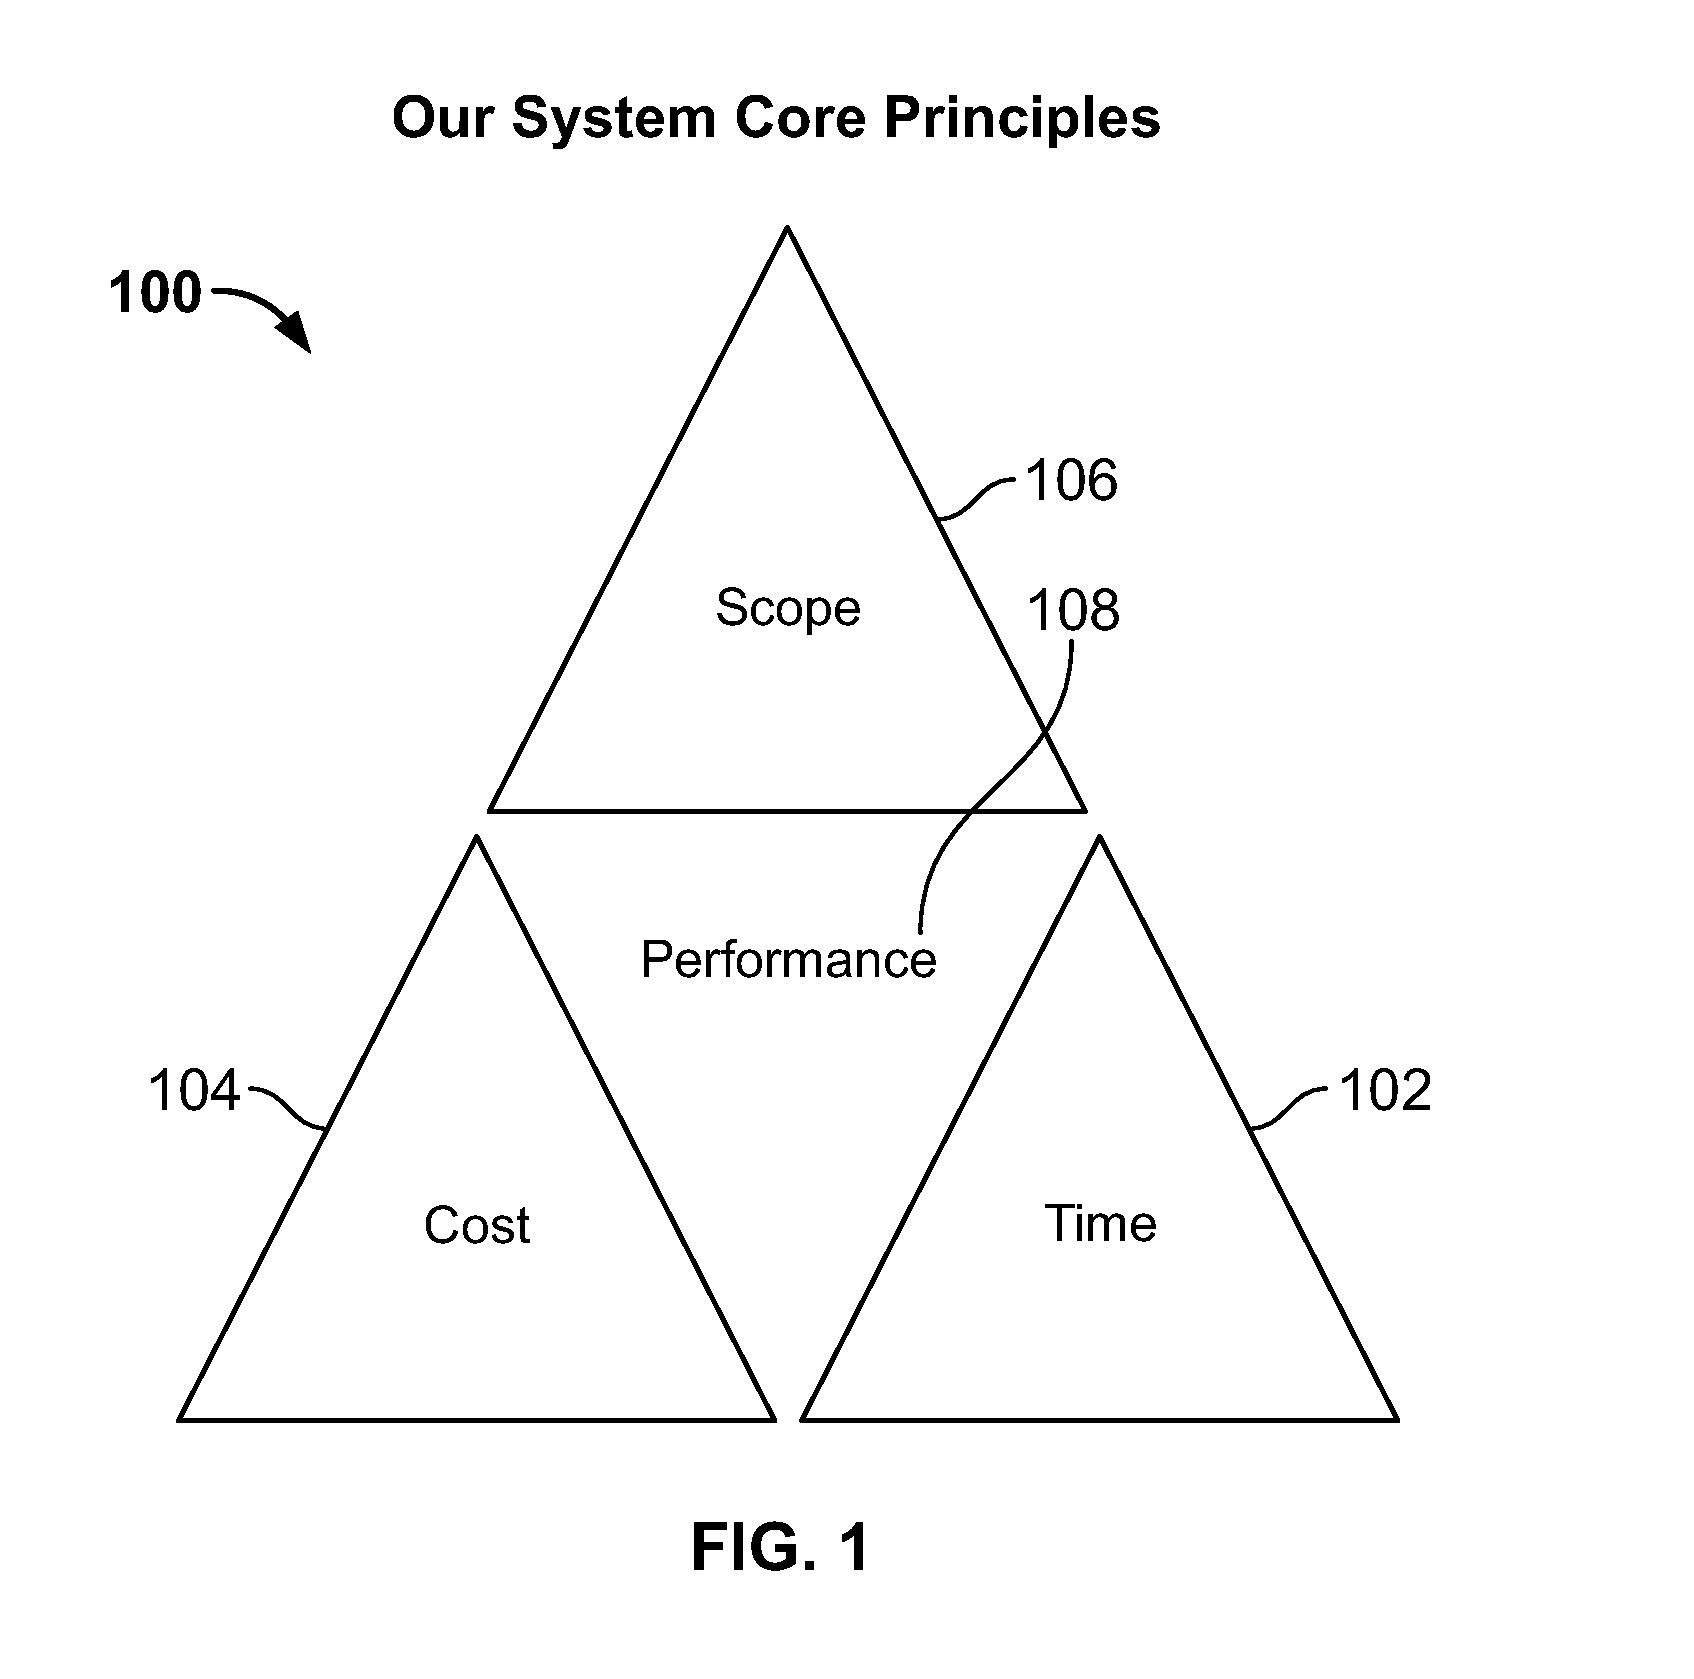 A computer implemented system and method for project controls